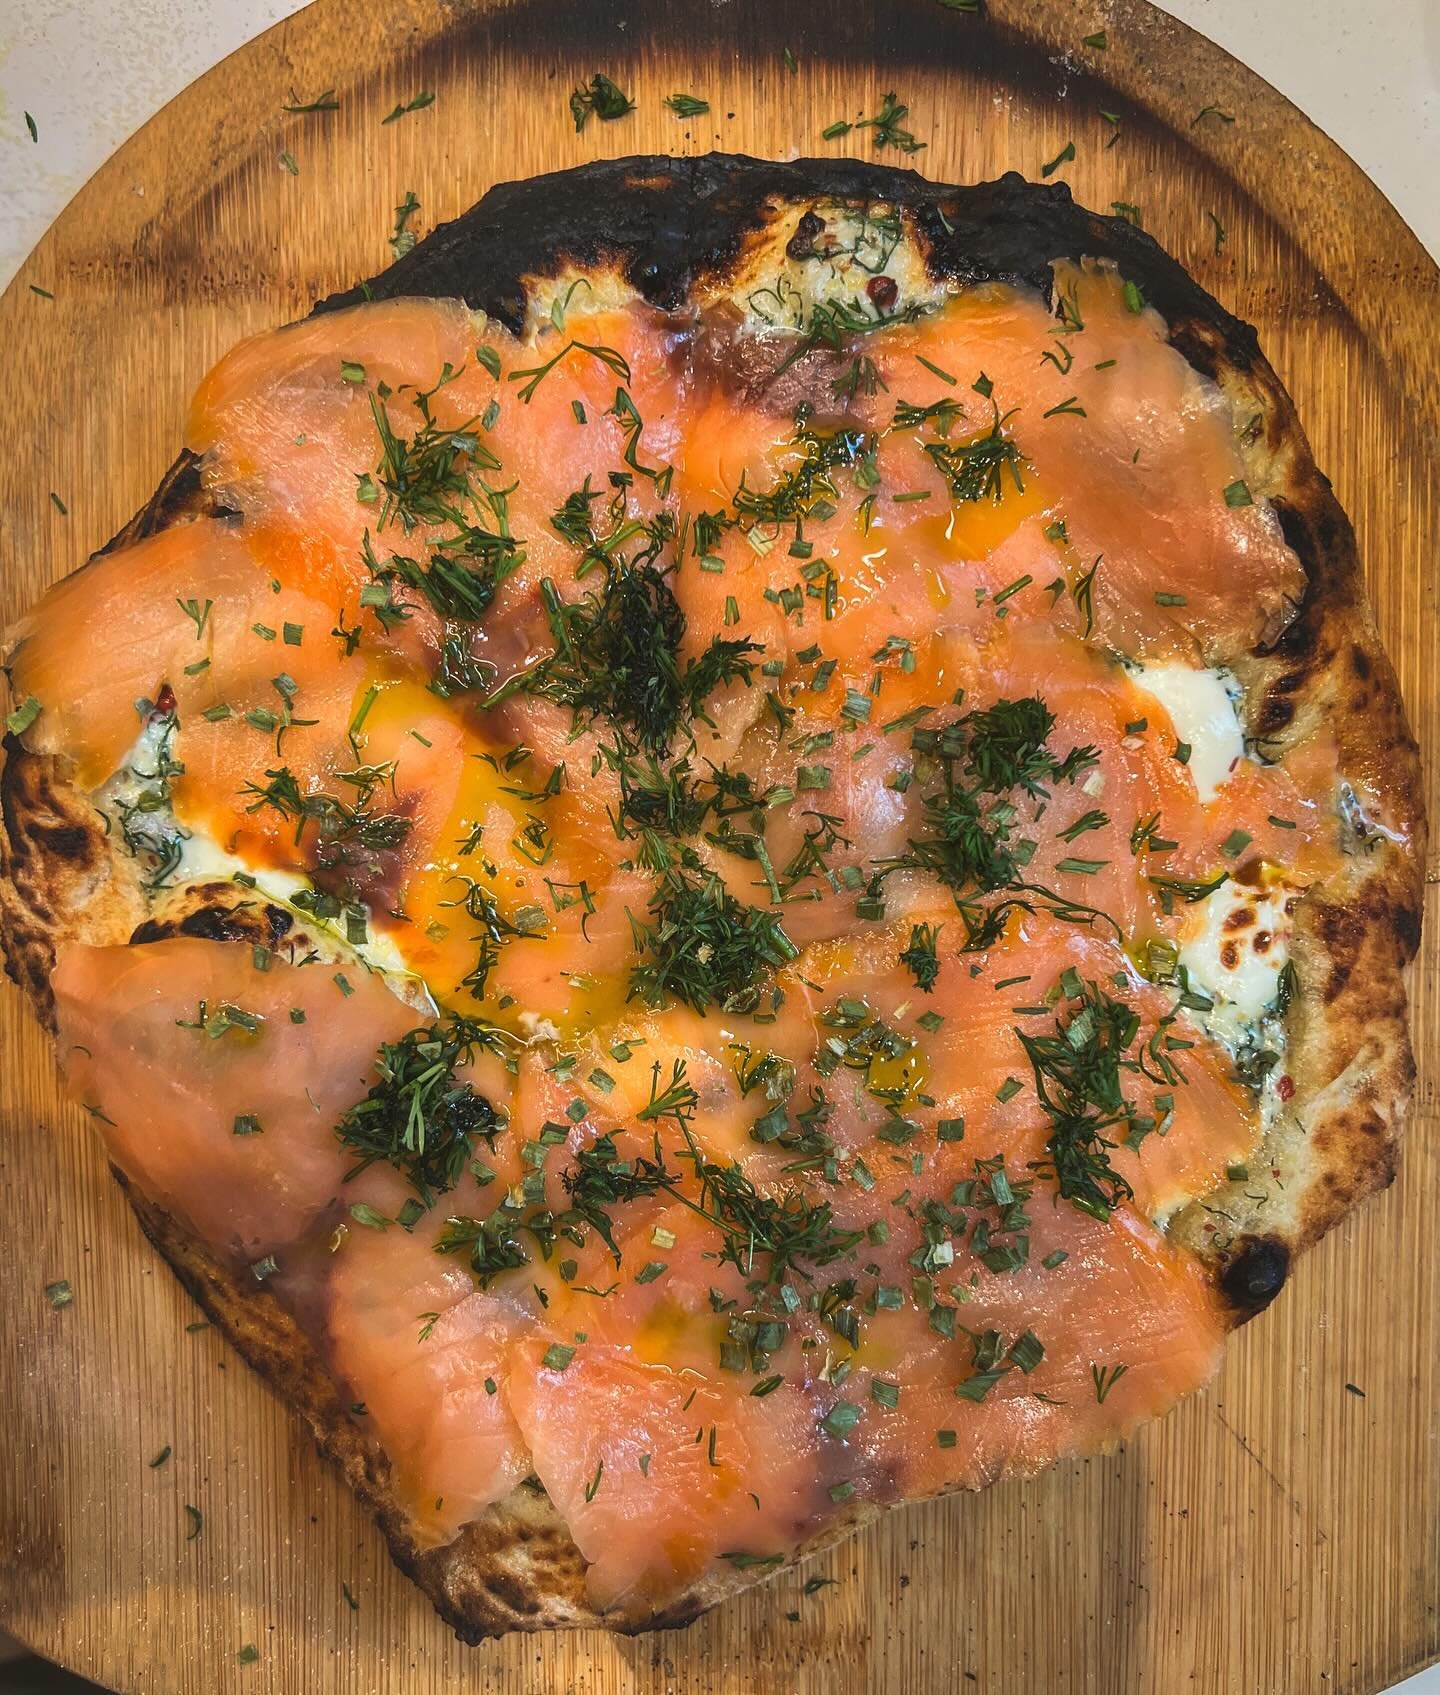 Finally getting around to posting the finished pics from pizza and pasta night: &ldquo;Nordic Pizza&rdquo; (cr&egrave;me fra&icirc;che, lemon zest, dill and pink peppercorns then topped with smoked salmon after baking; artichoke heart with sundried t